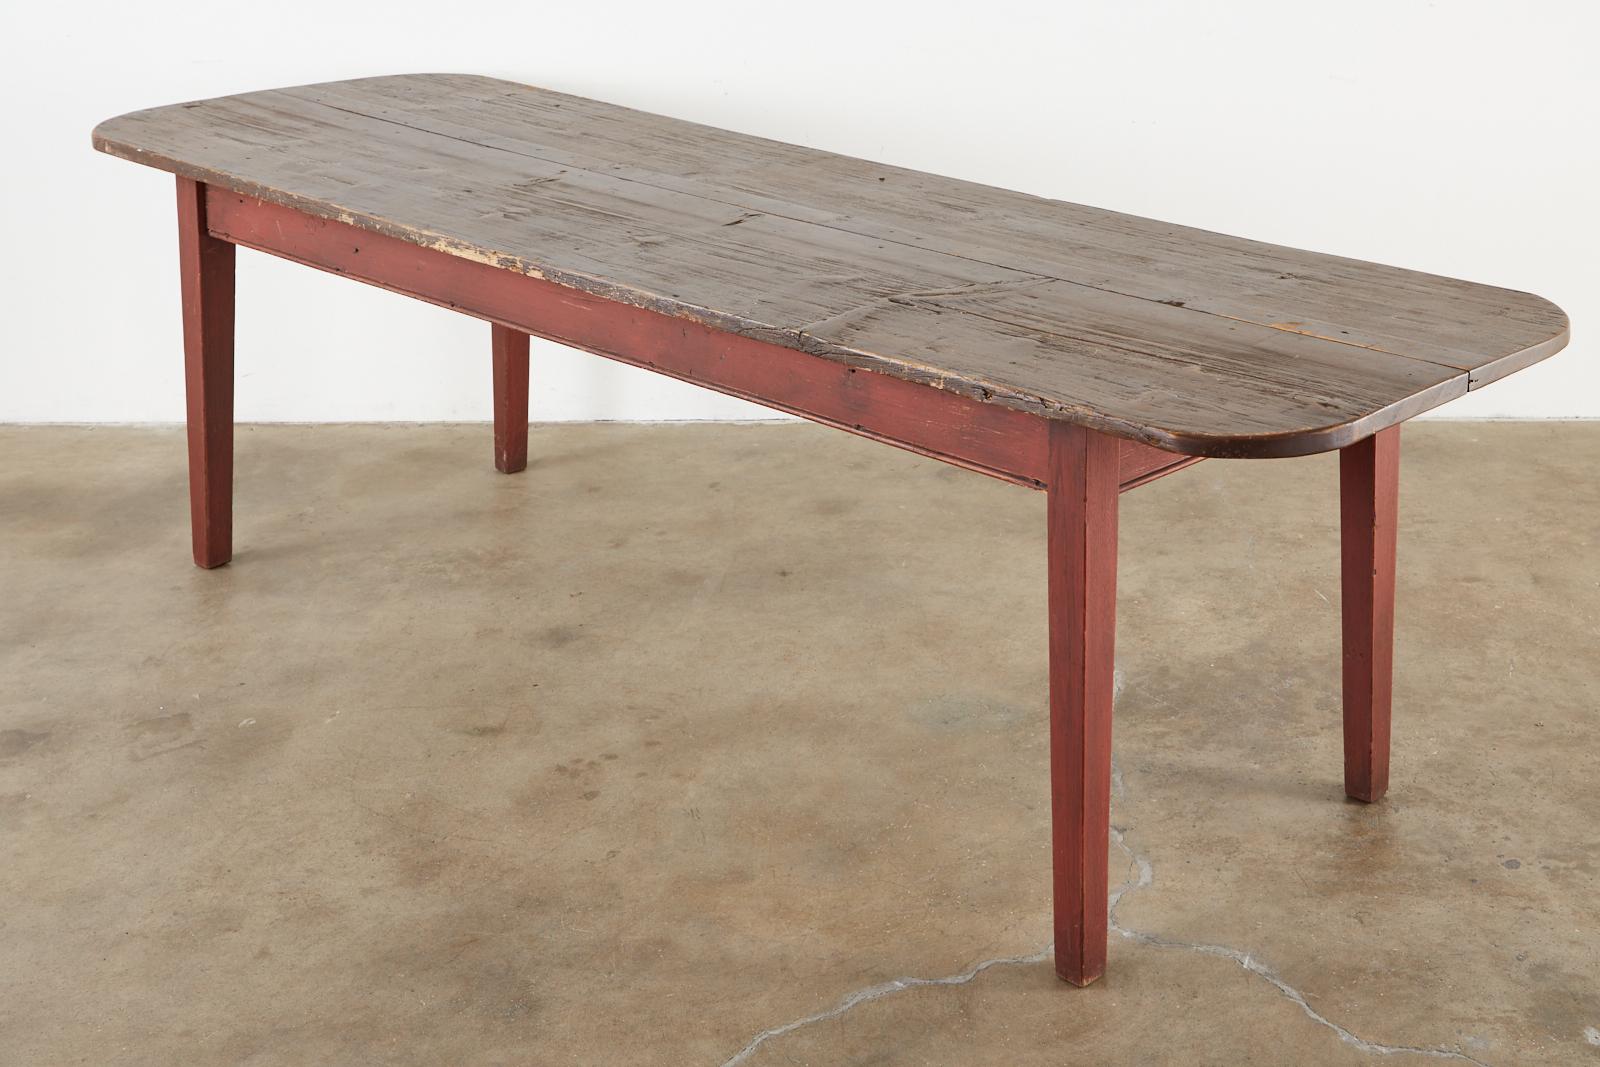 Rustic American country farmhouse harvest table or dining table crafted from reclaimed pine wood. The top is made from two 1 inch thick long planks having rounded ends. The base is painted barn red and is supported by square, tapered legs. Ample leg